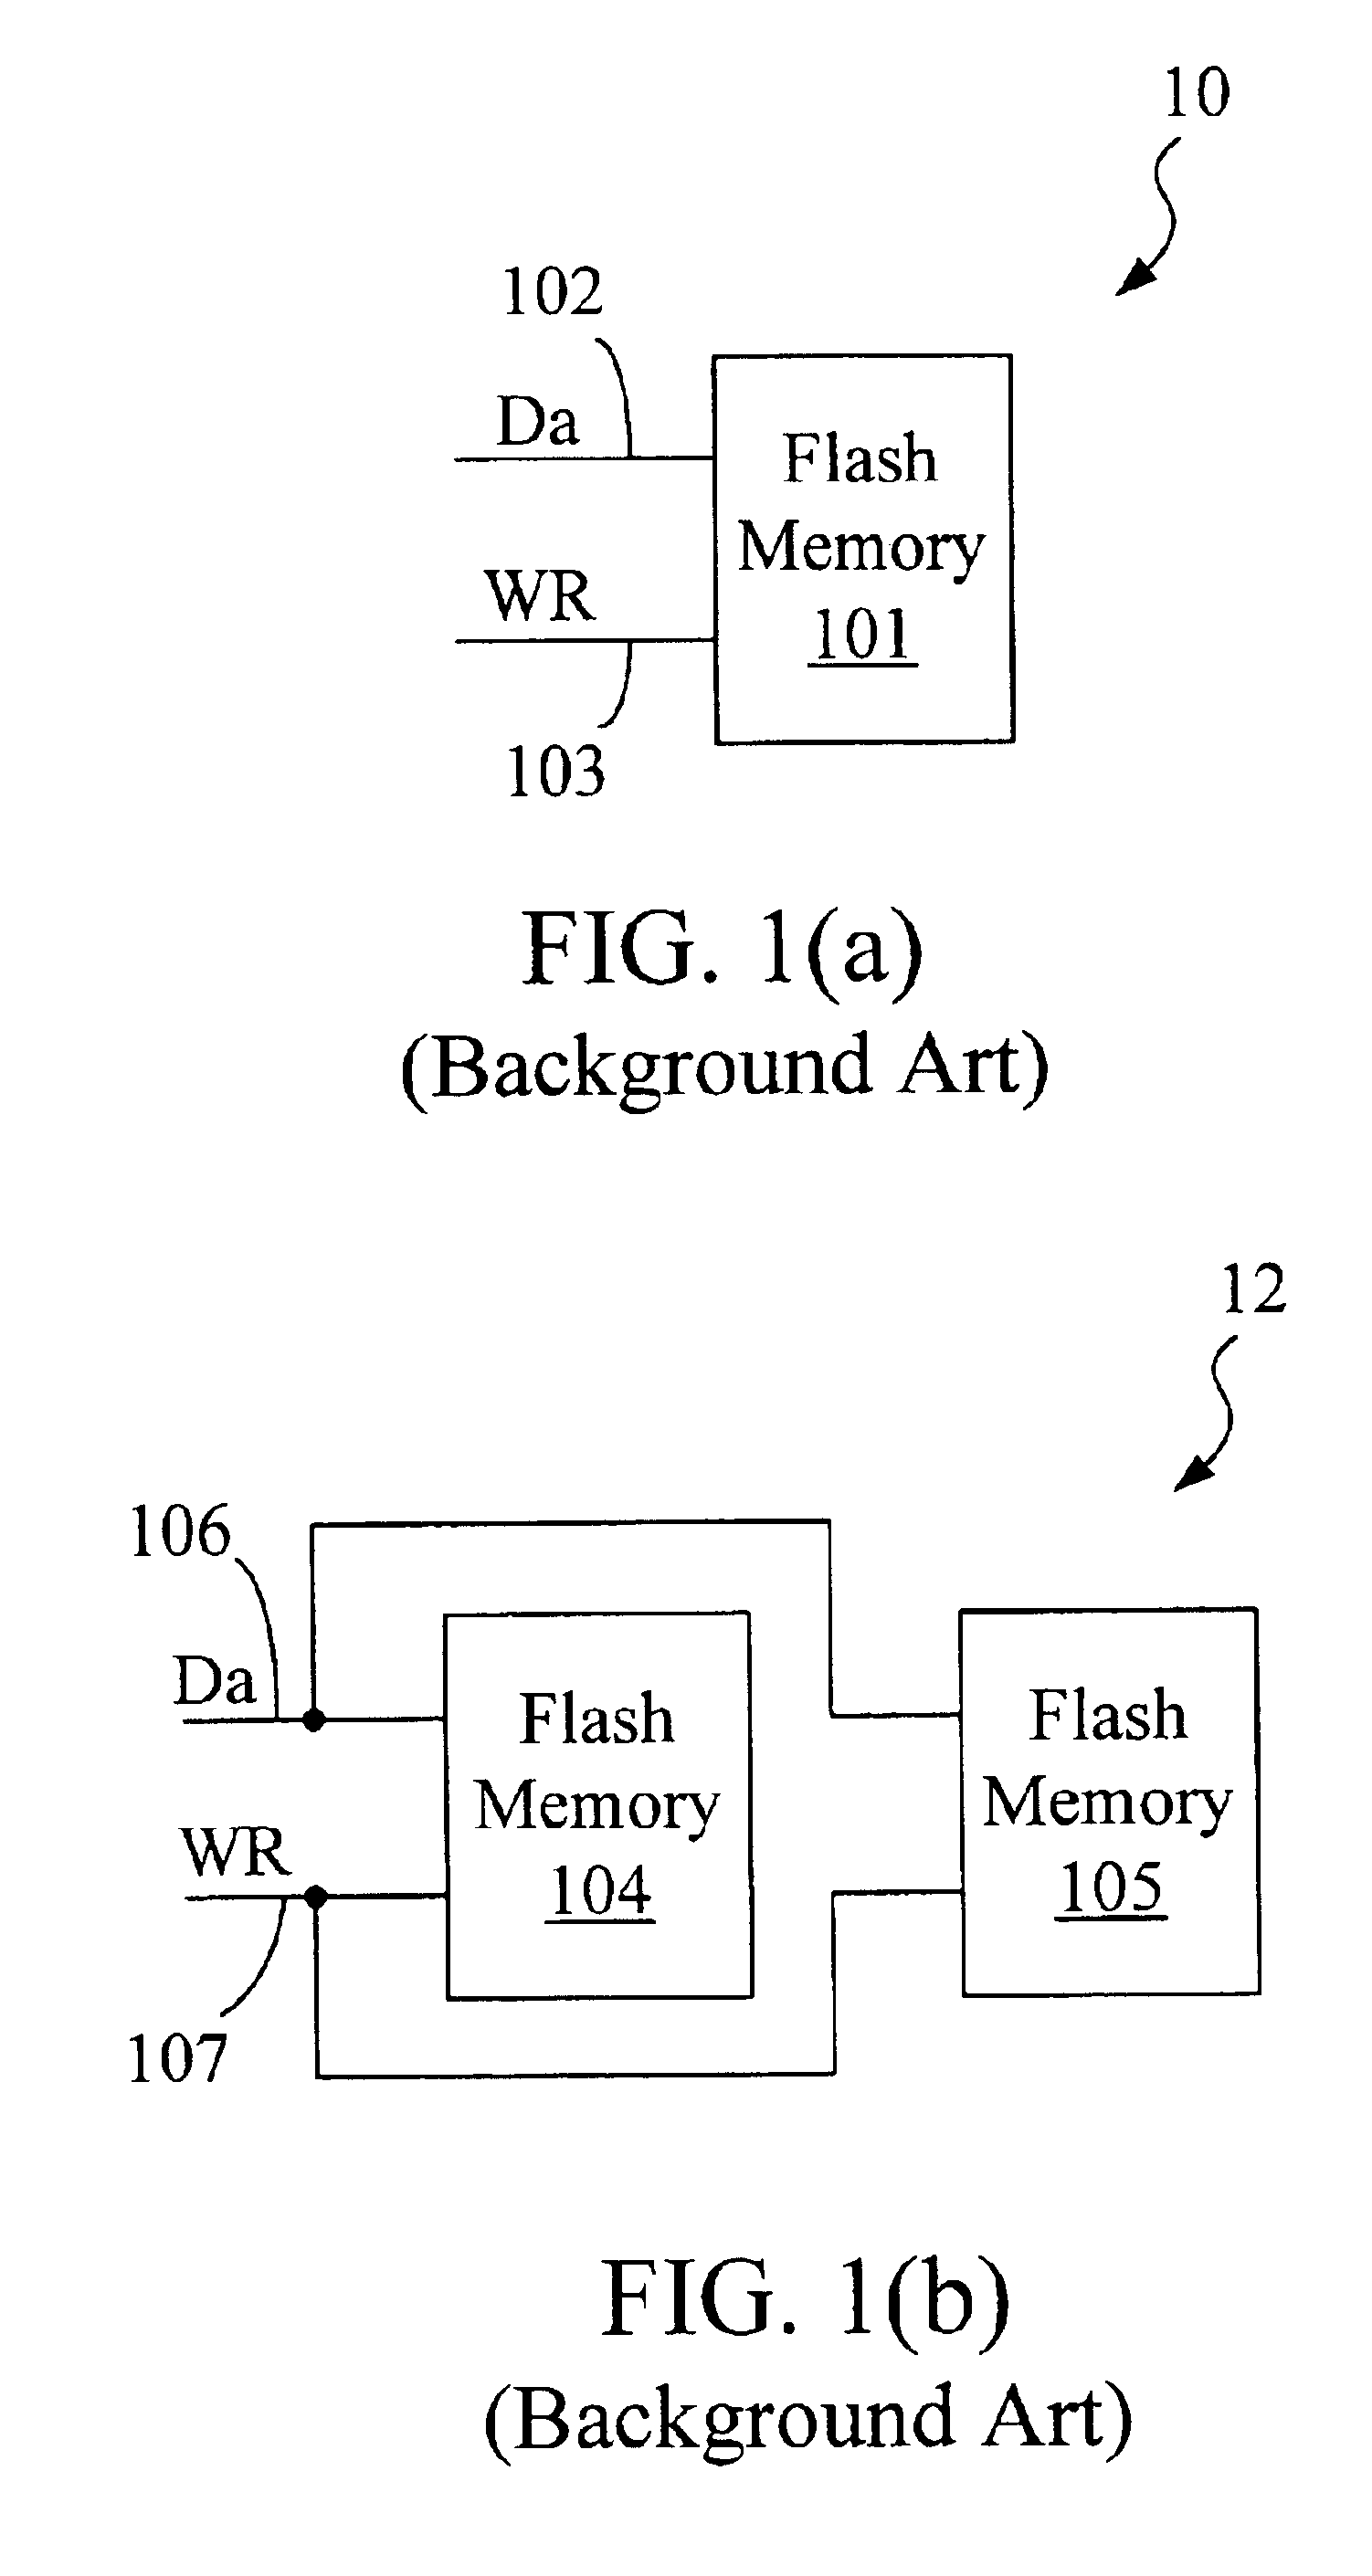 Data writing and reading methods for flash memories and circuitry thereof